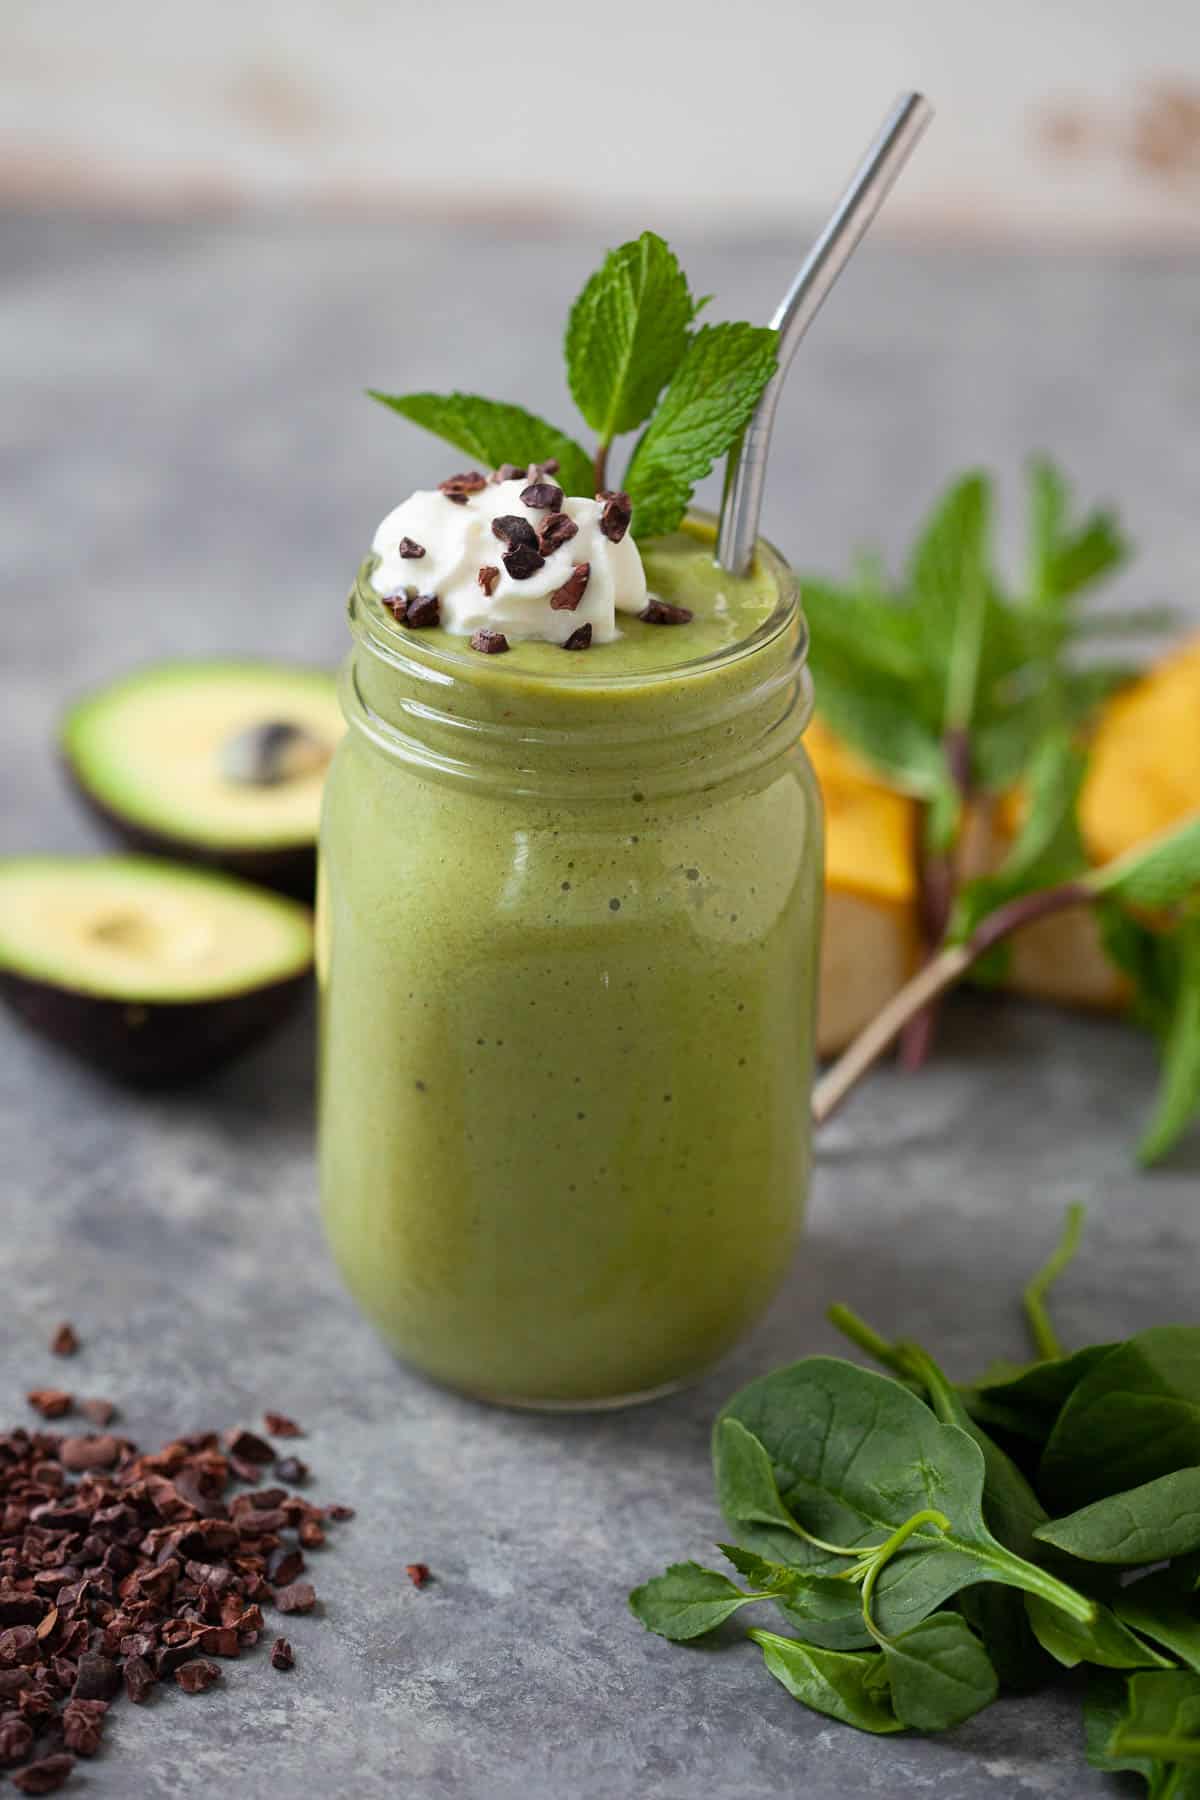 shamrock shake smoothie with whipped topping and cacao nibs for garnish